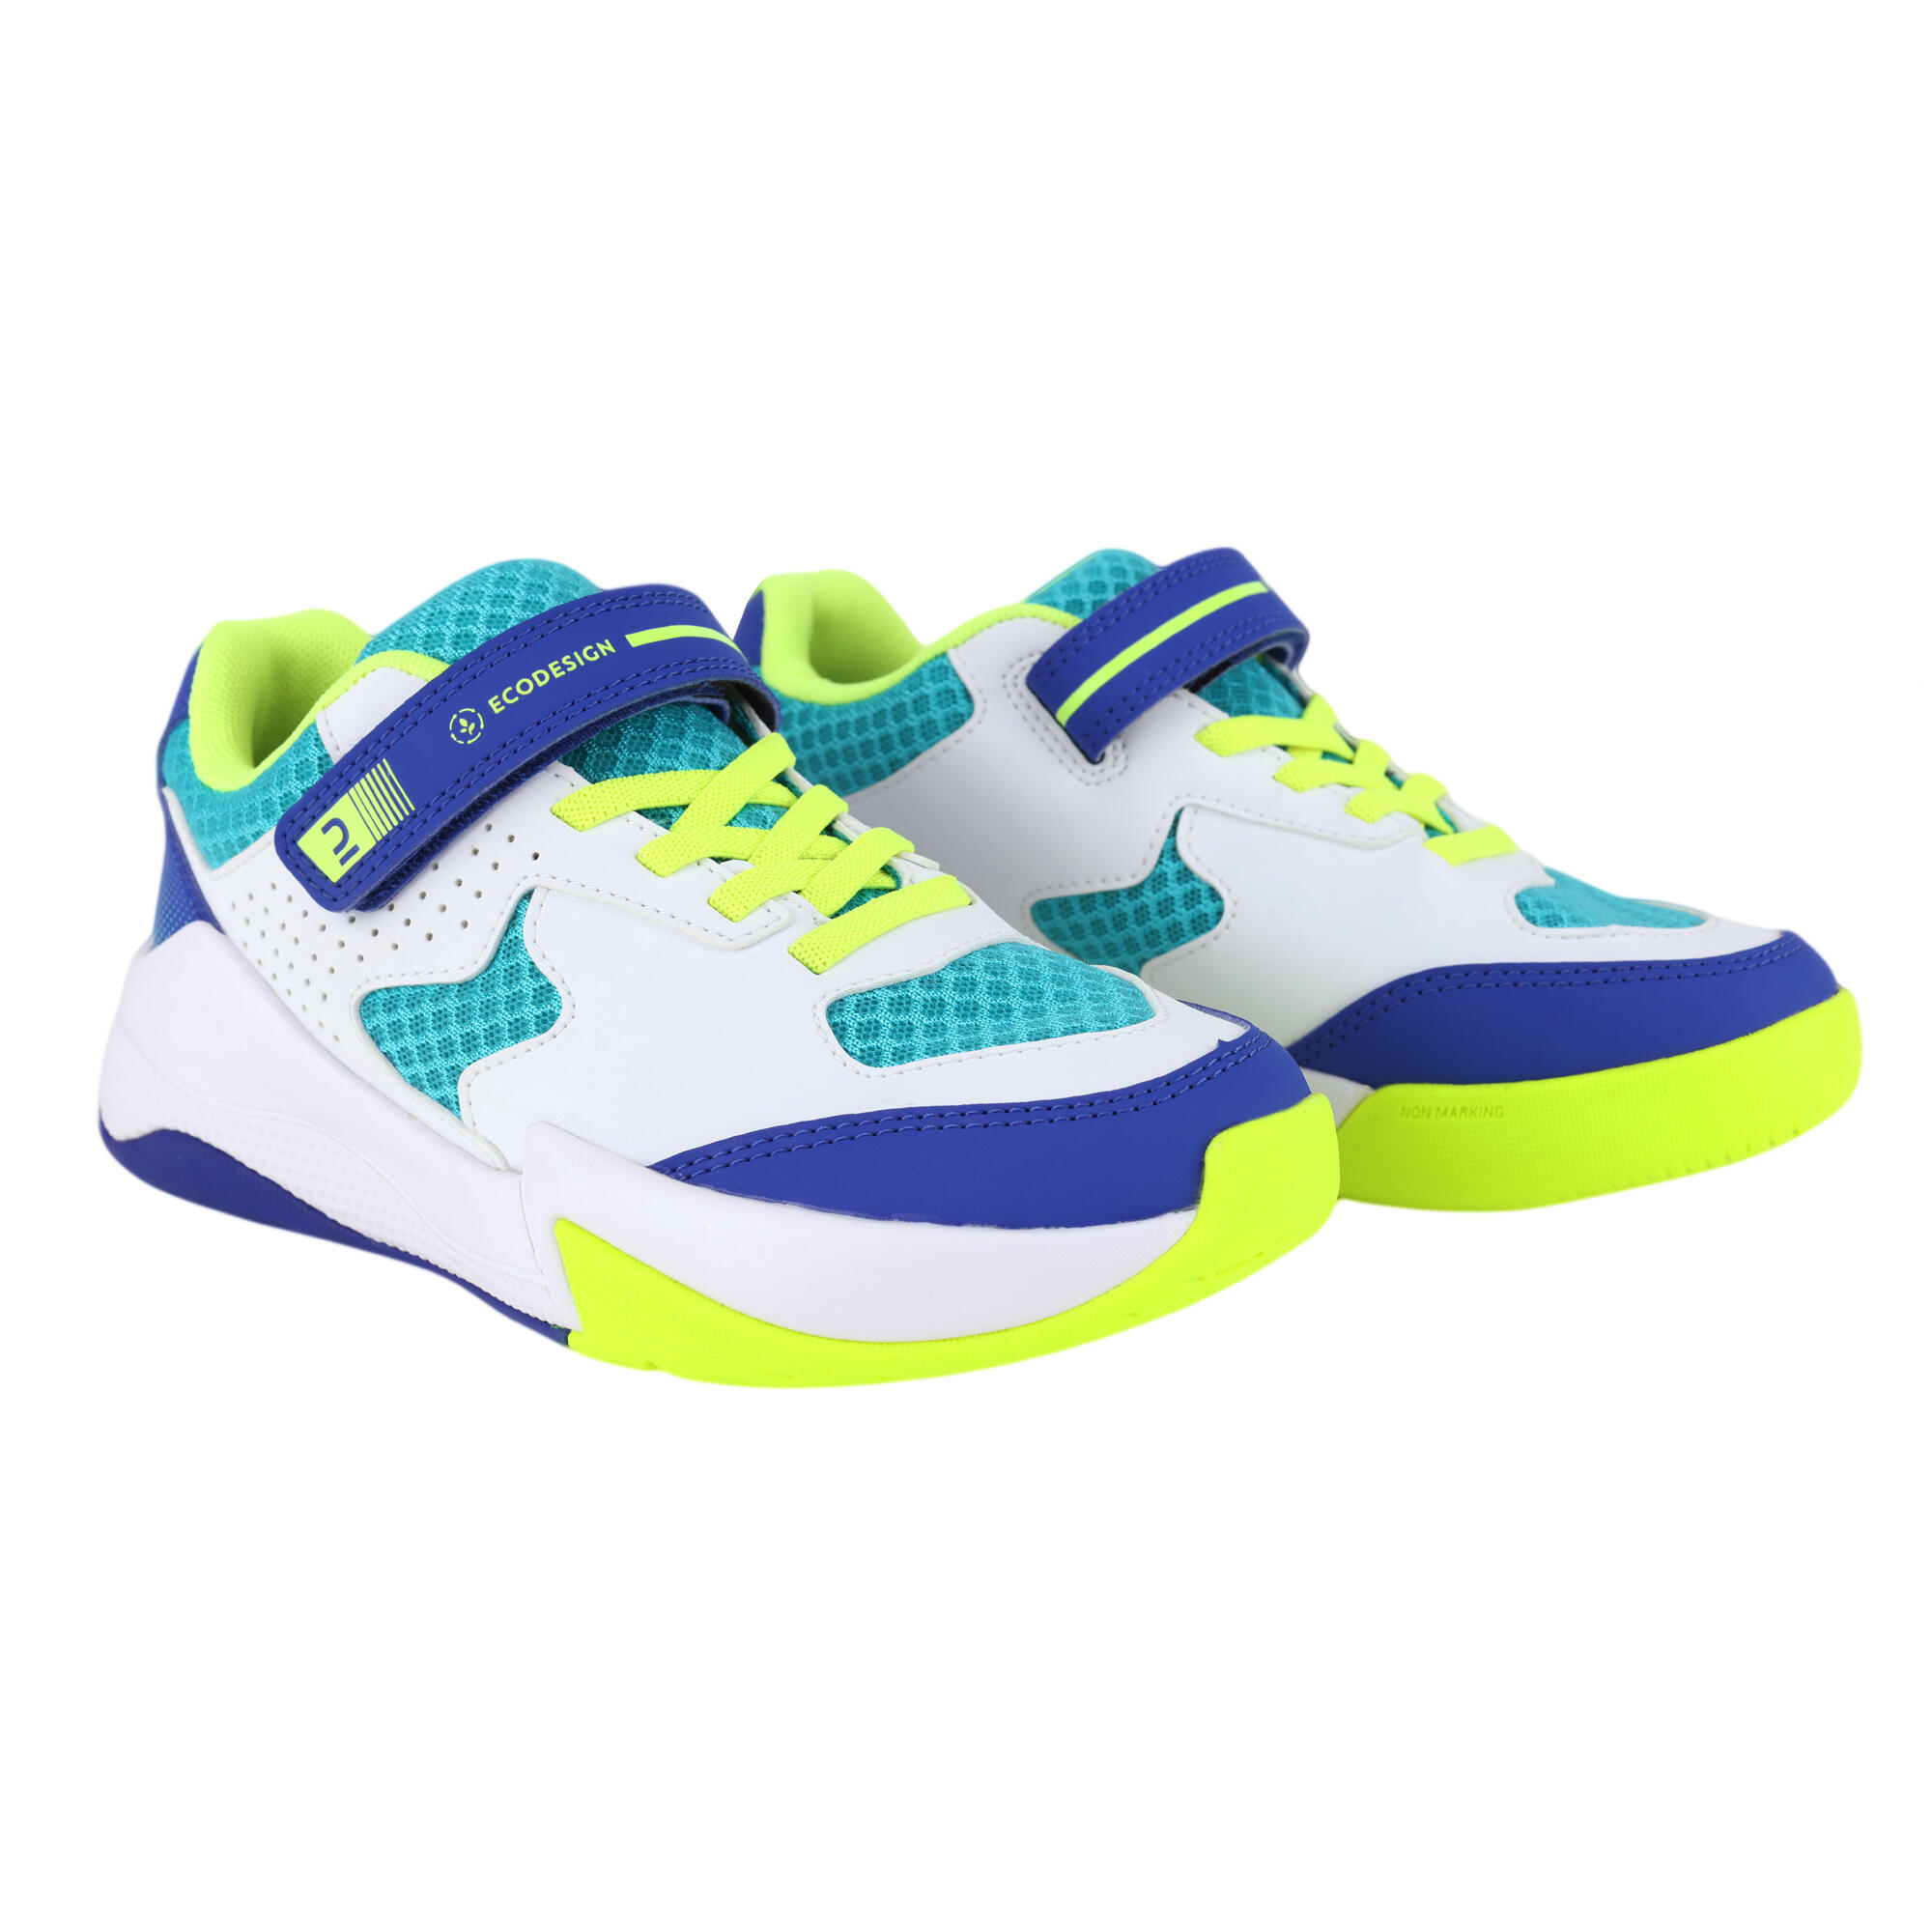 ALLSIX Volleyball Shoes VS100 Comfort With Rip-Tab - White/Blue & Green.